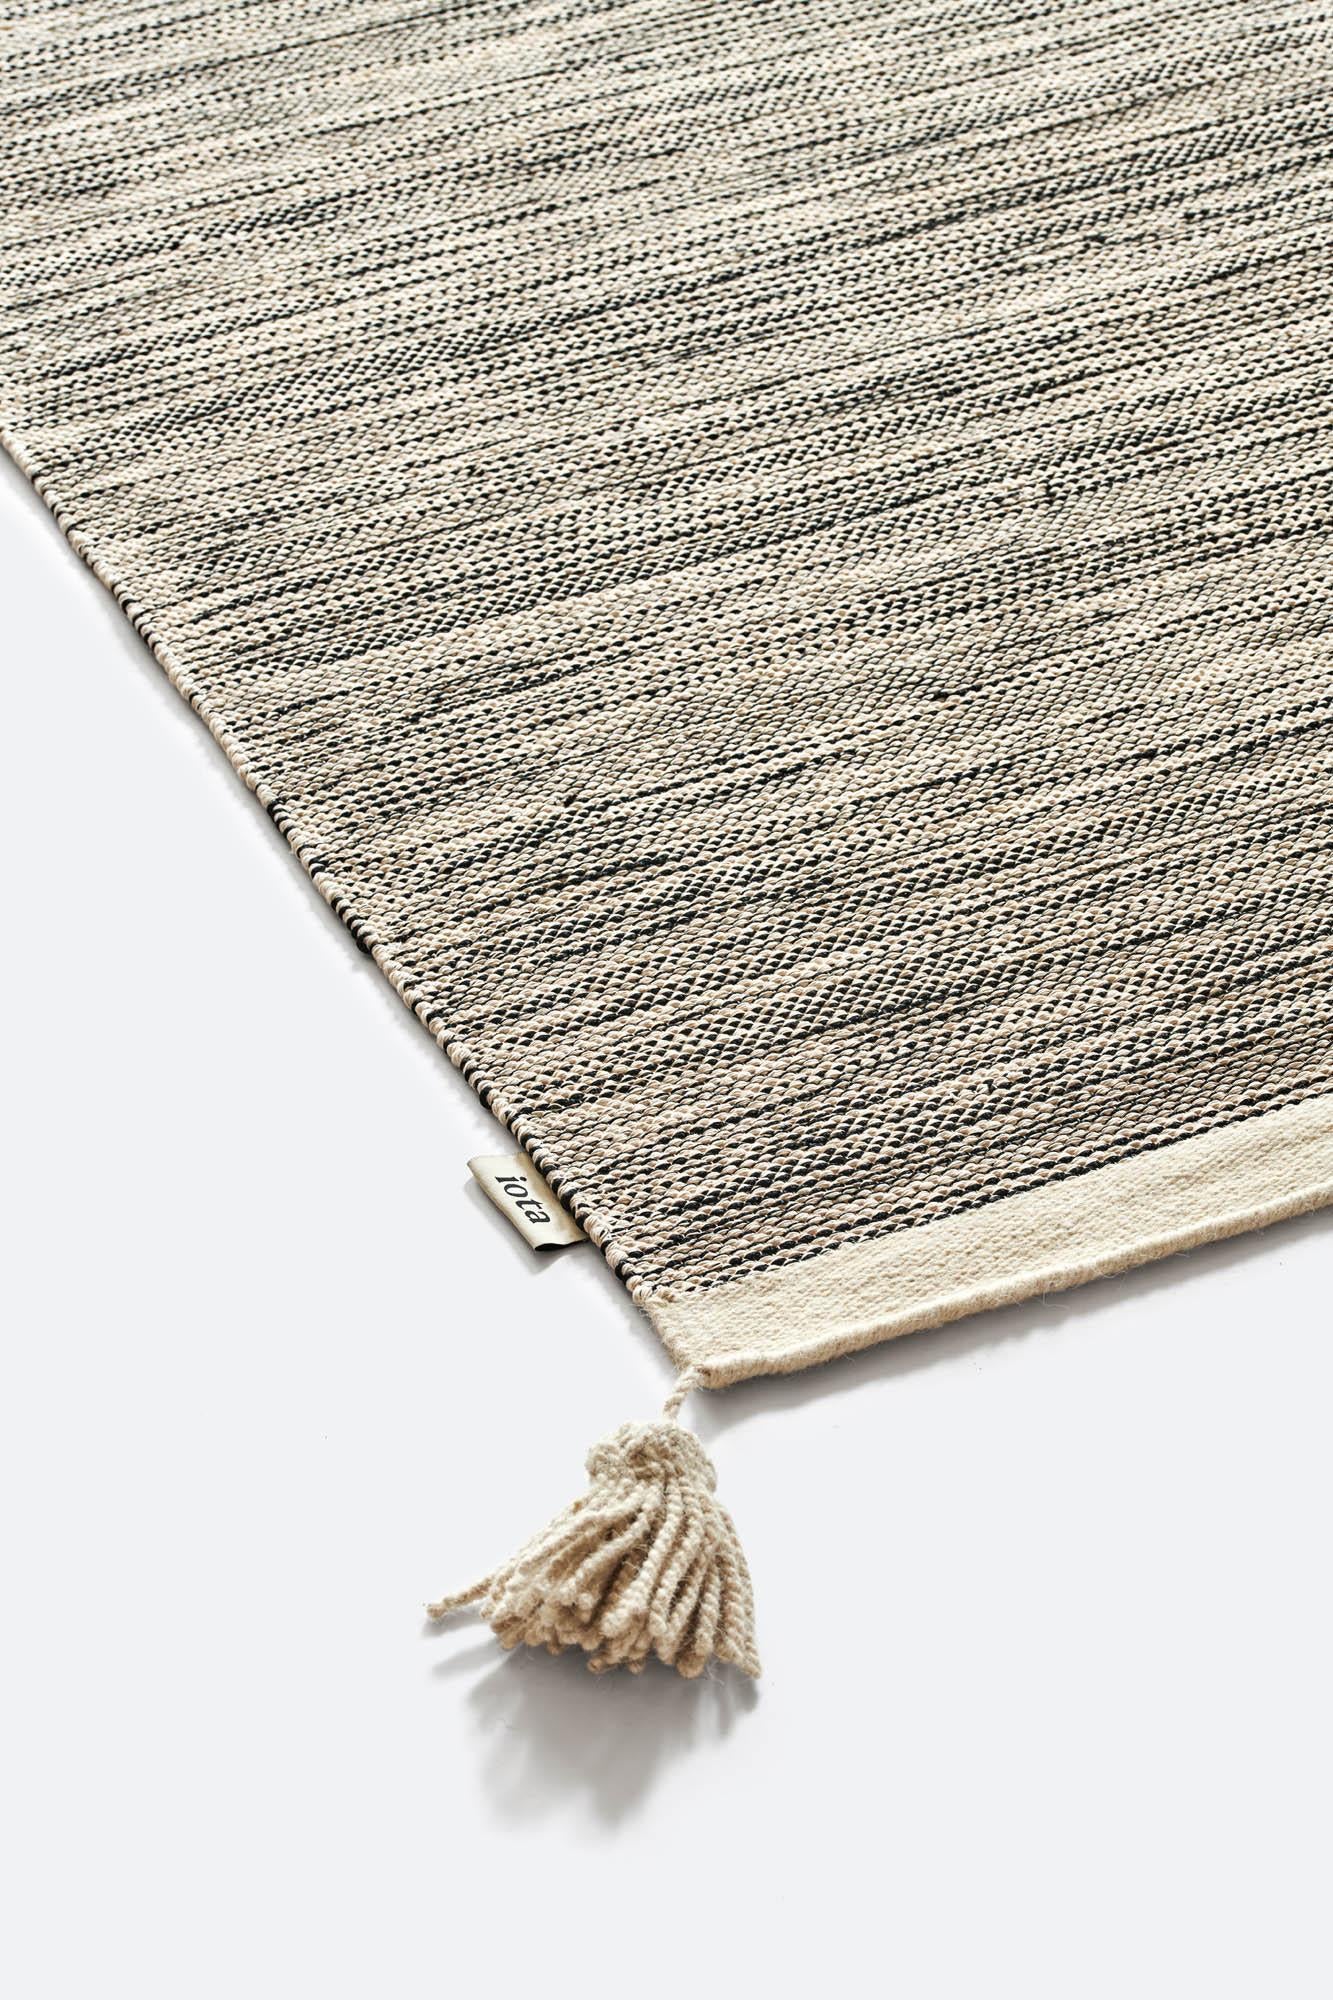 Hand-Crafted 'Rivers' 300x400 cm Handmade Woven Indoor Rug in Black Sand by Iota For Sale